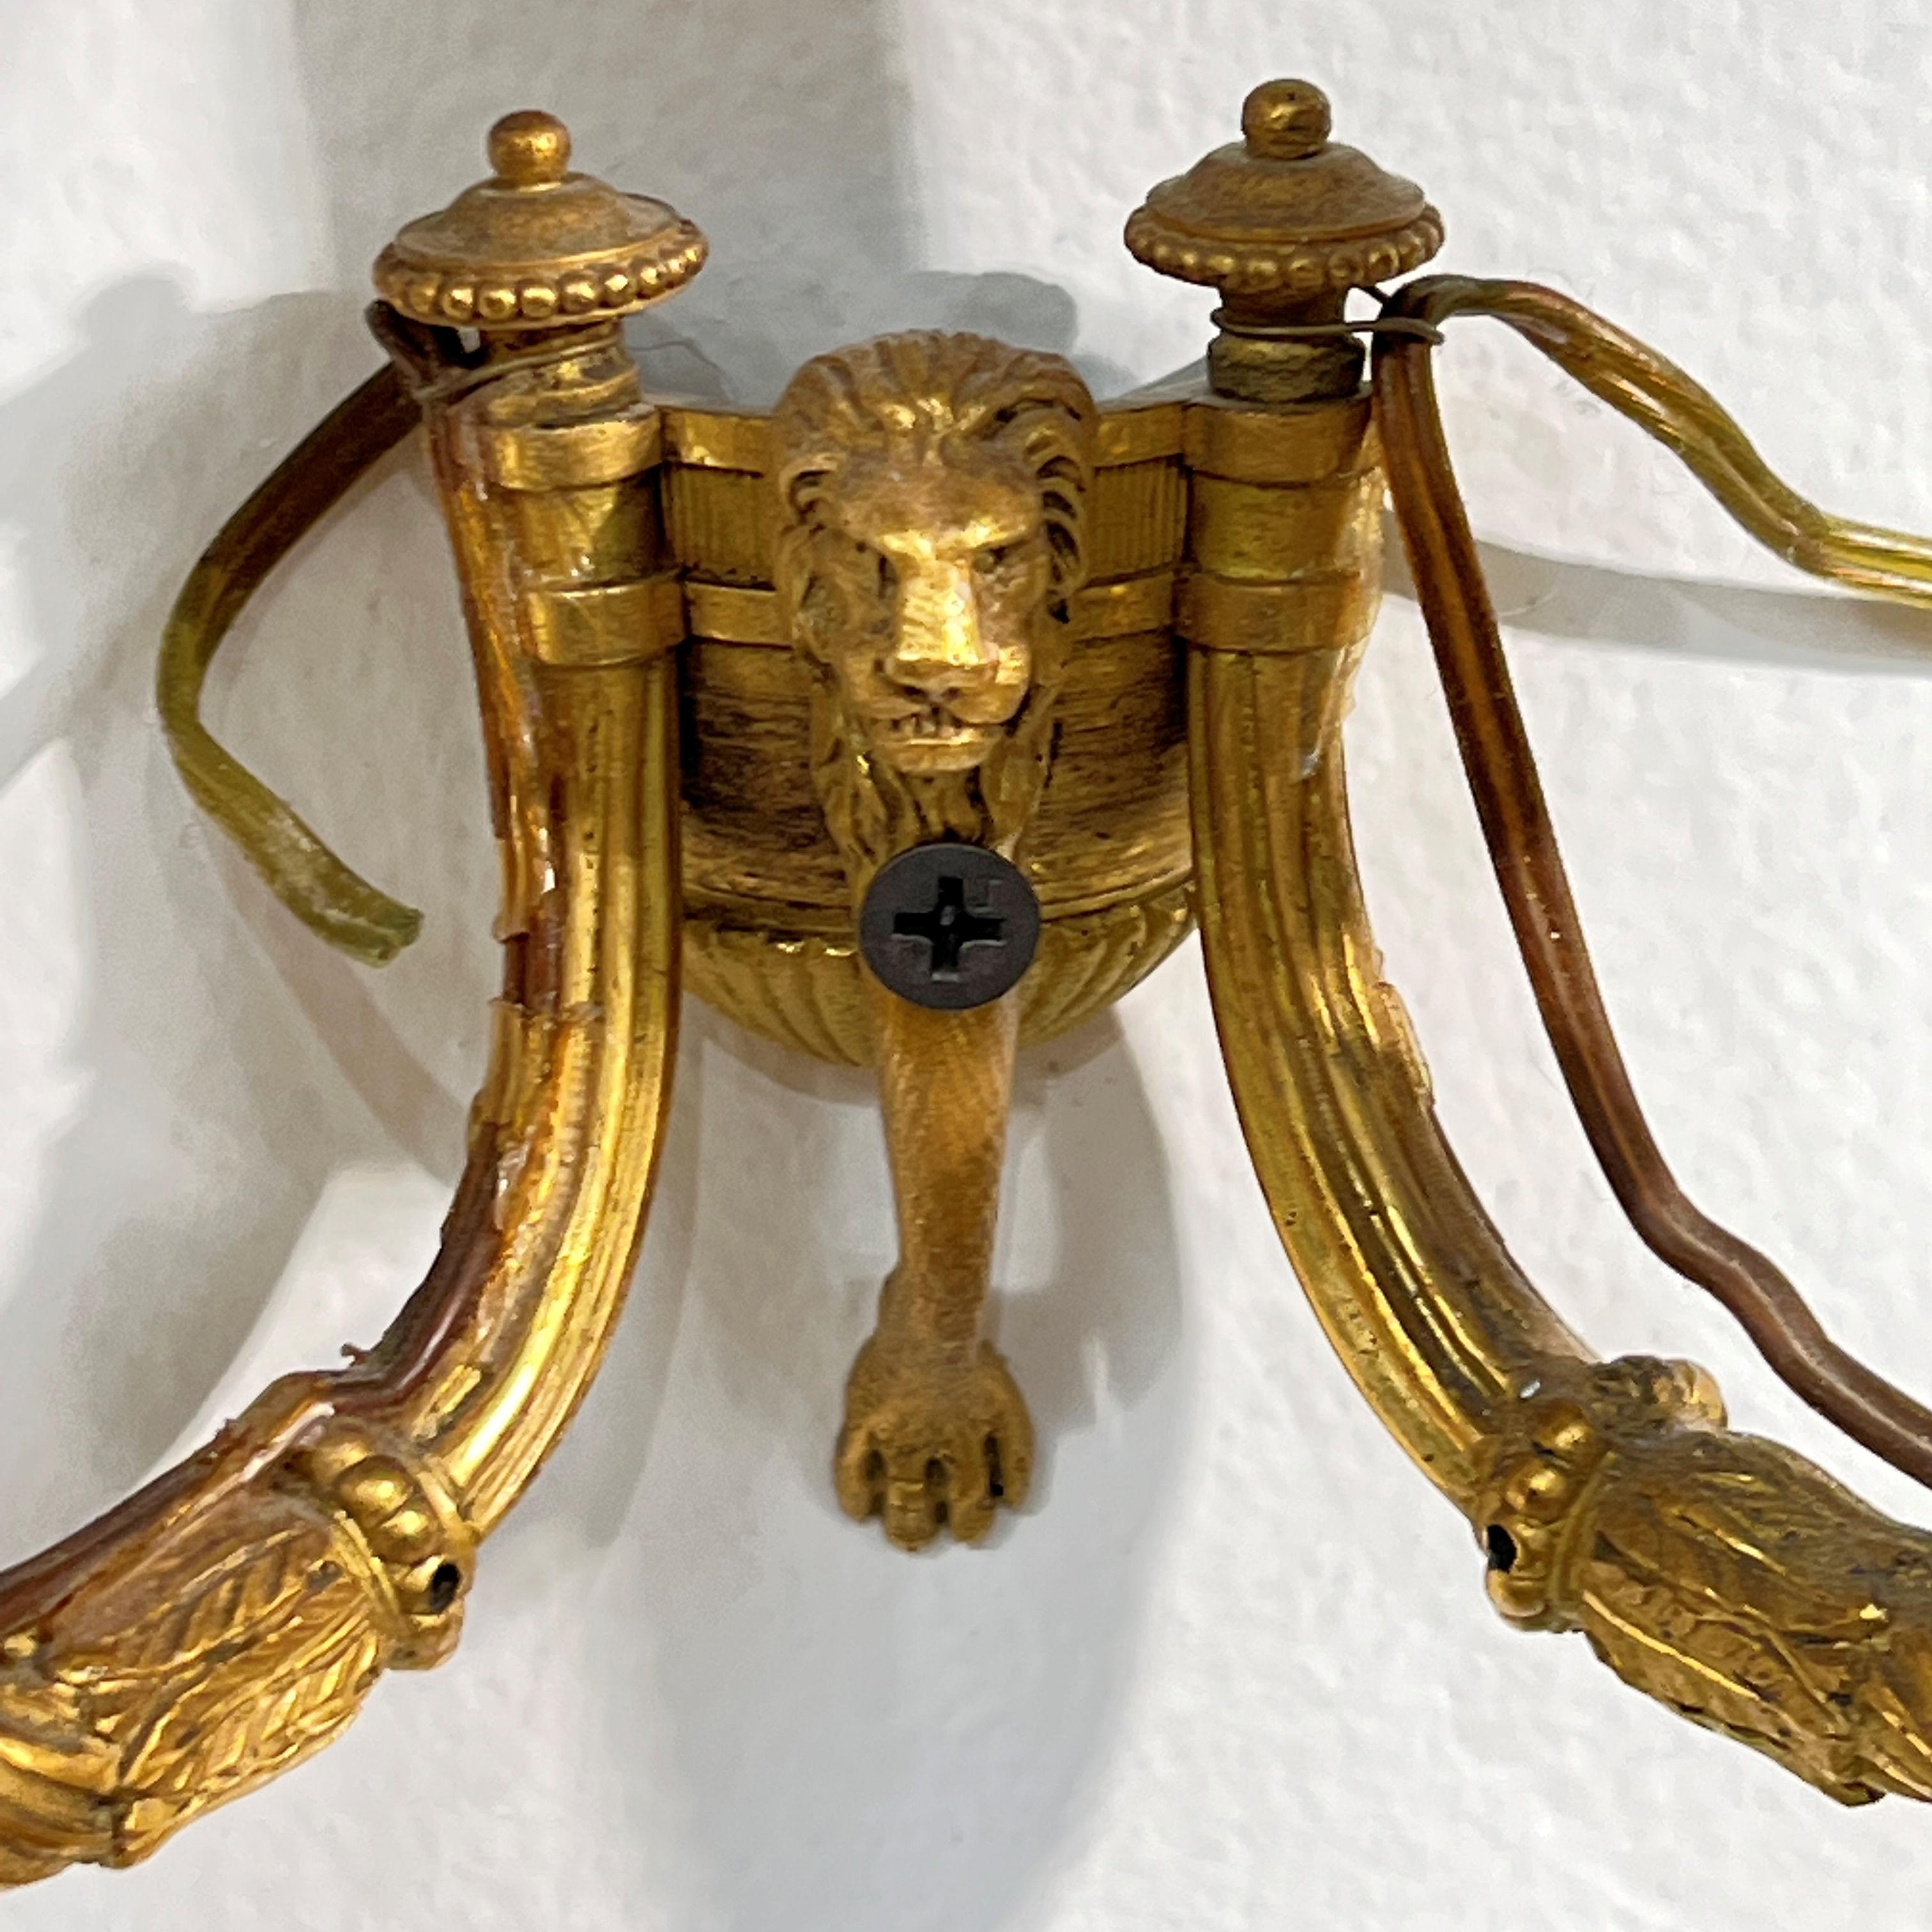 Our pair of ormolu bronze wall lights from the late Georgian period date from the late 18th century. They feature two u-shaped candle arms decorated with an acanthus leaf and bellflower motifs, emanating from wall plates with mask, leg and paw of a